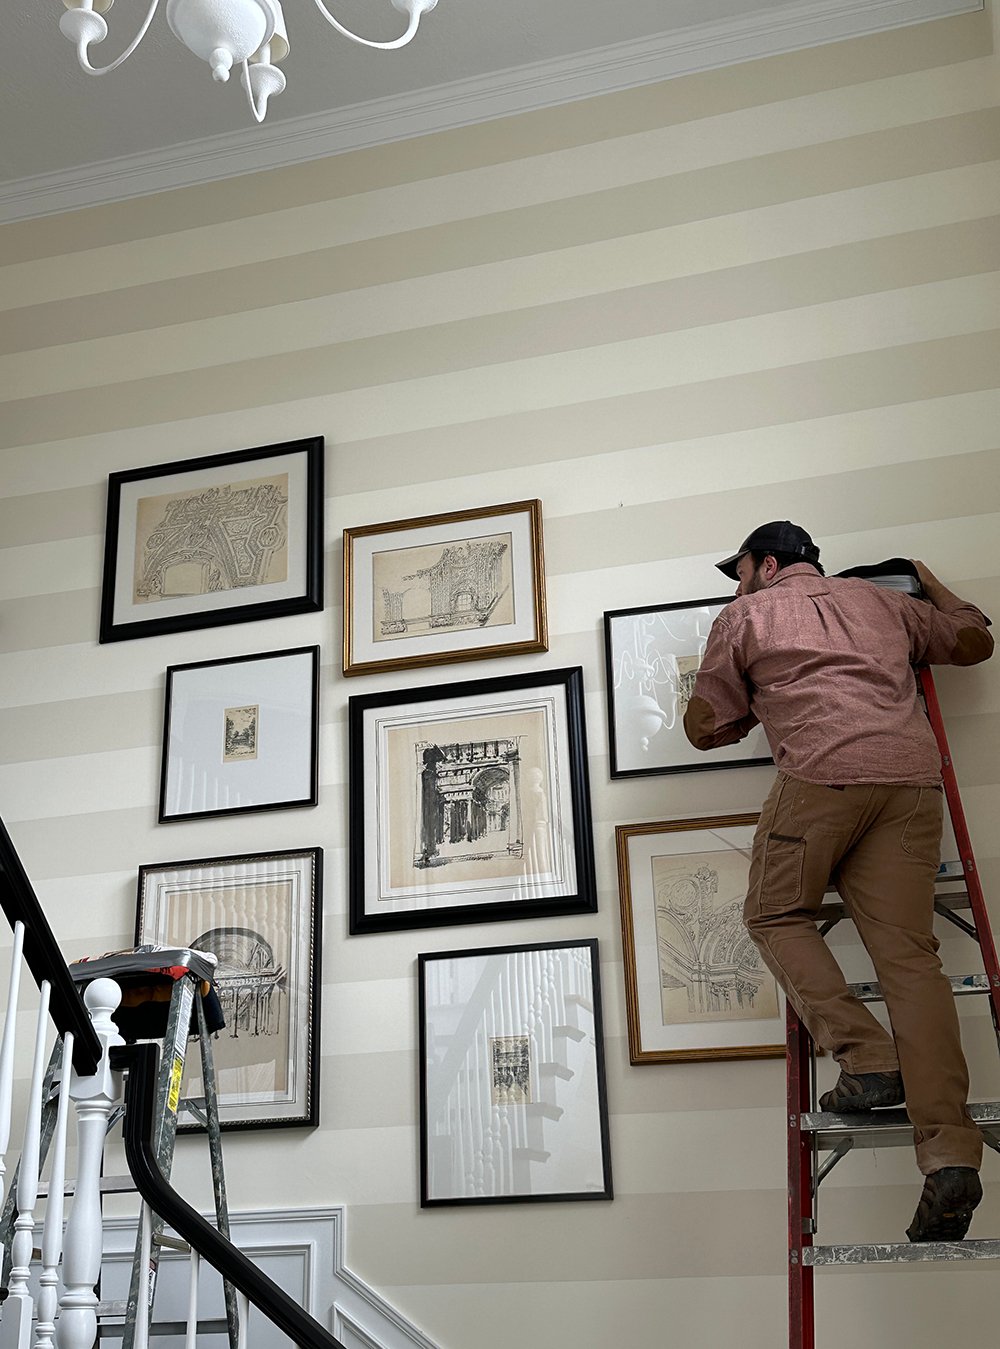 How to Easily Layout and Install a Gallery Wall - roomfortuesday.com